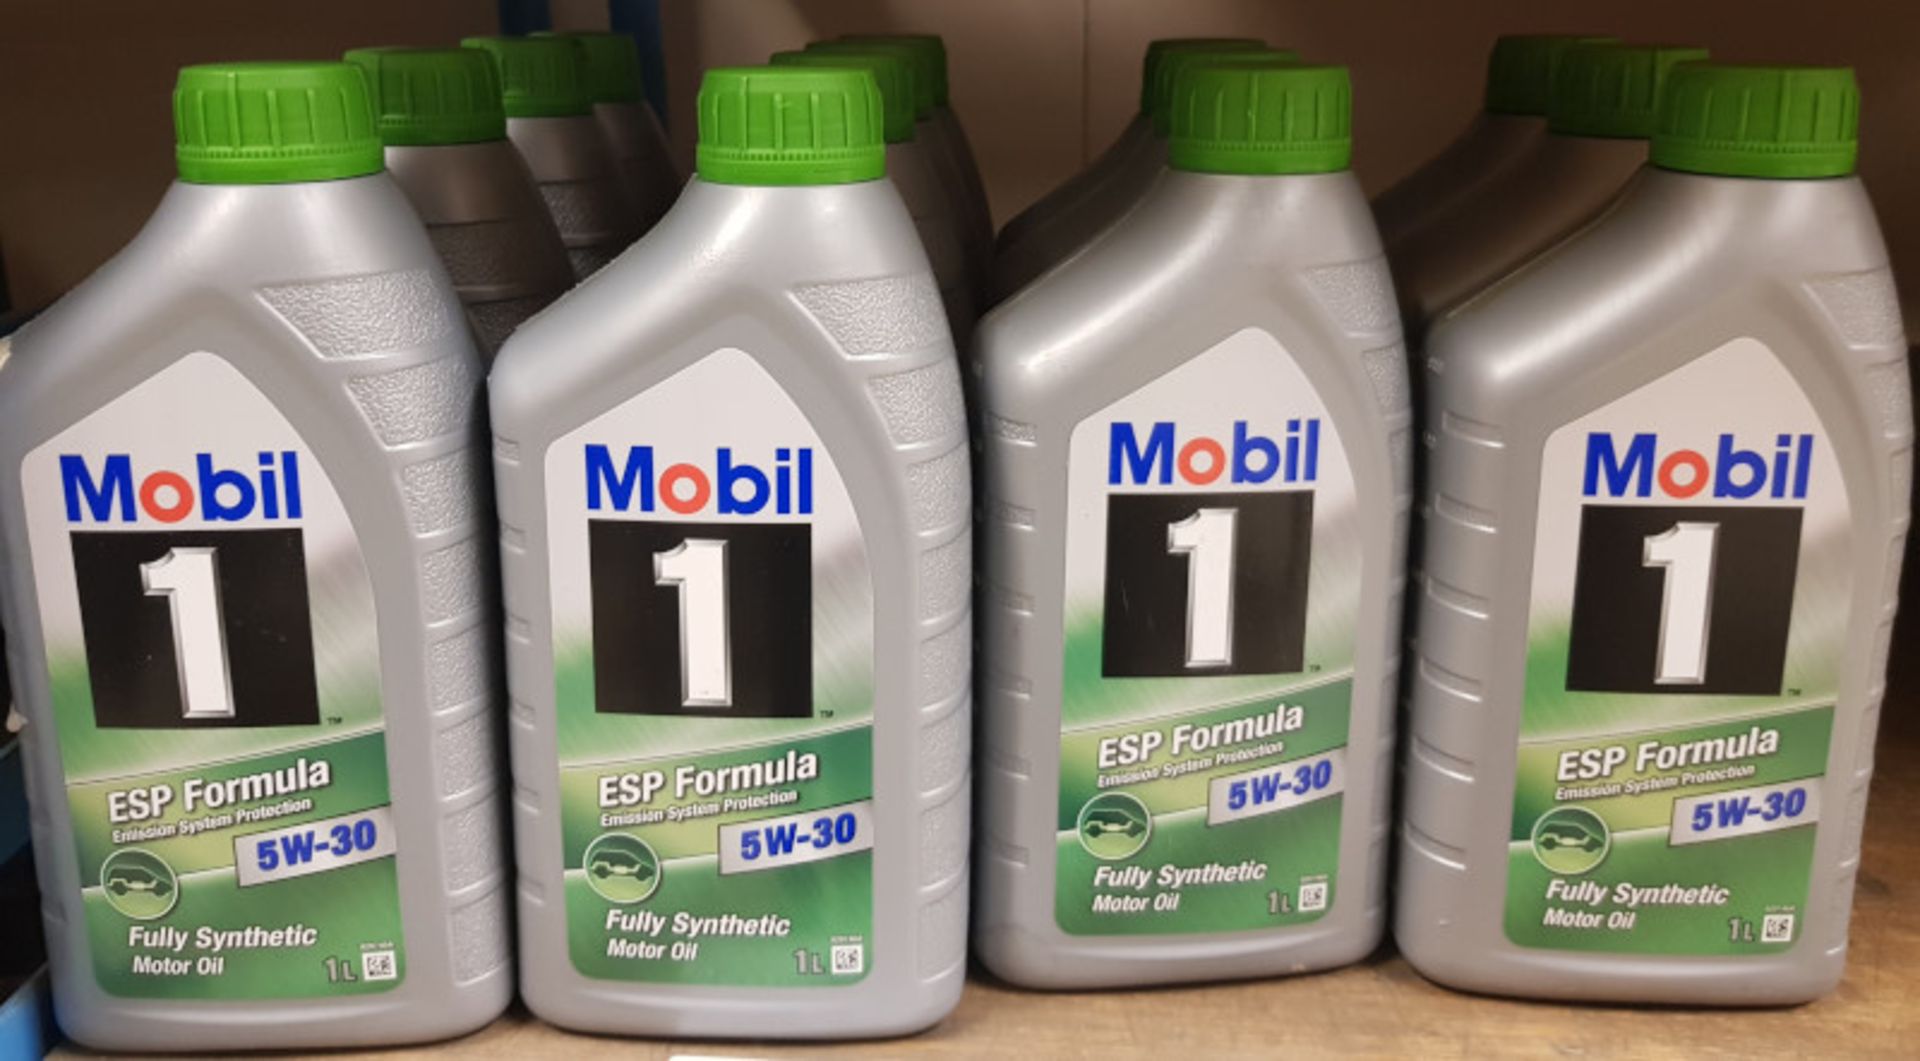 14x Mobil 1 5W-30 ESP Formula Fully Synthetic Motor Oil - 1L - Image 2 of 2